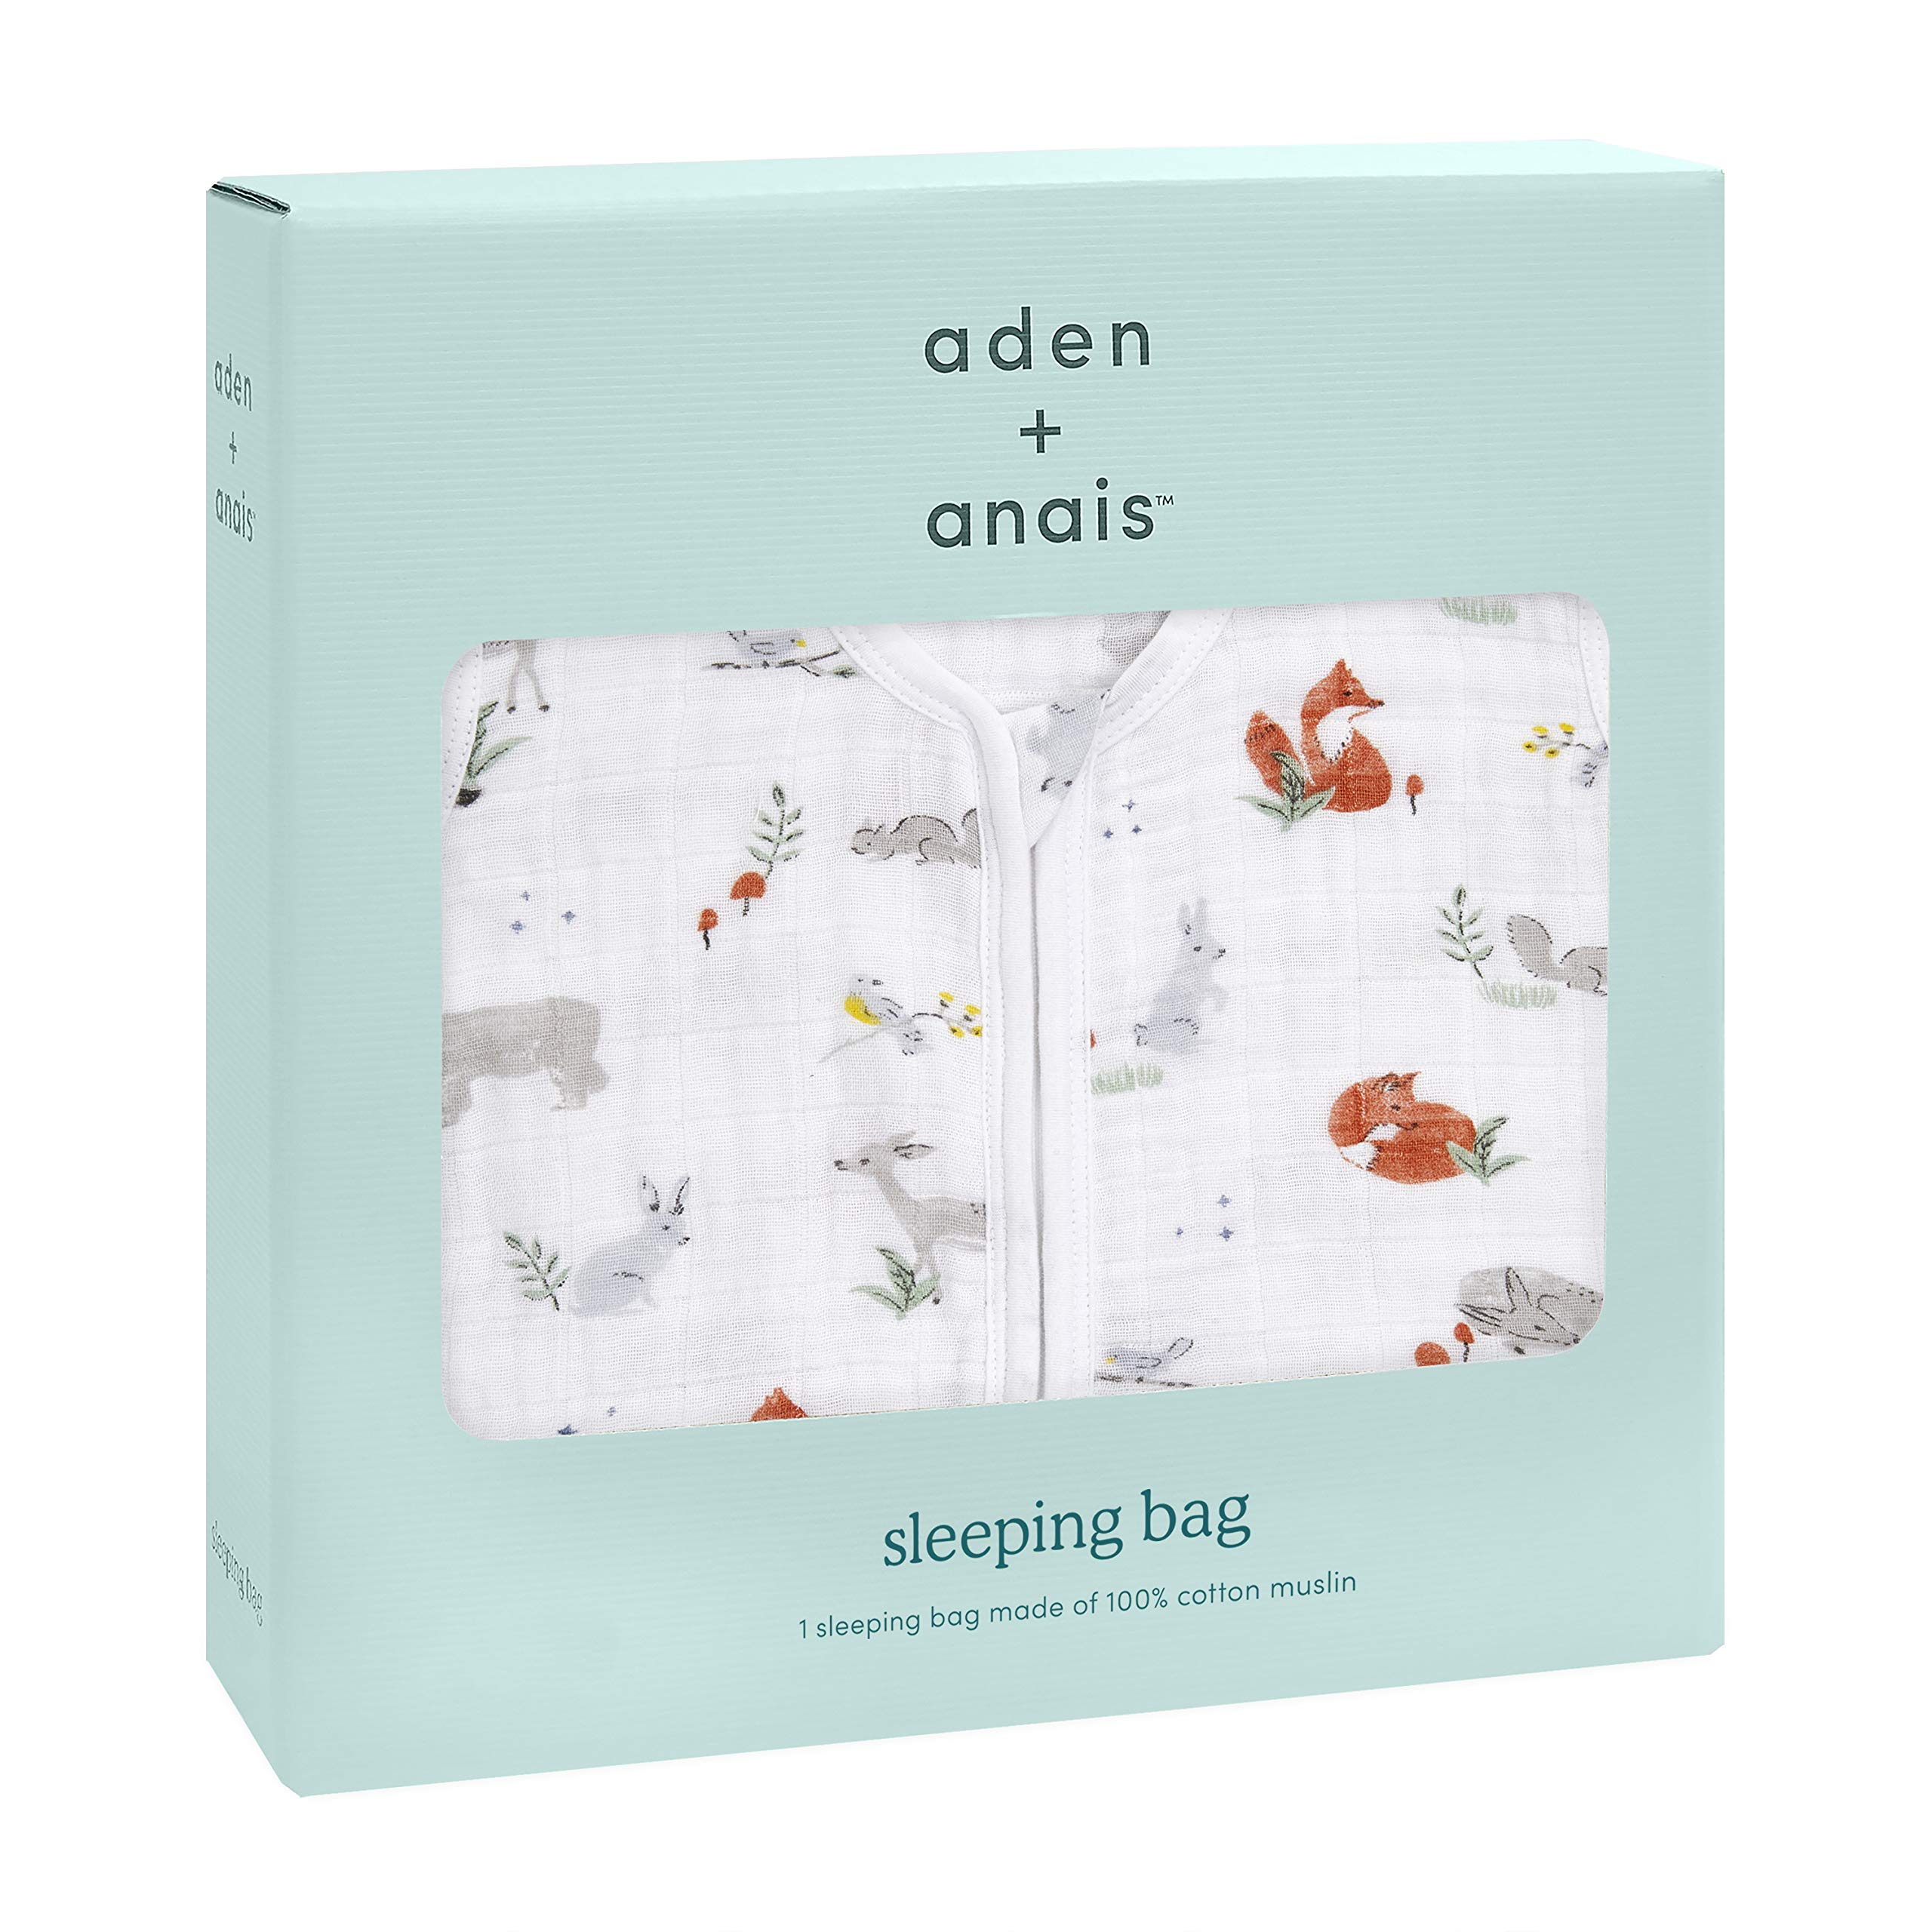 aden + anais Baby Sleeping Bag, 100% Cotton Muslin, Wearable Swaddle Blanket for Girls & Boys, Newborn Sleep Sack, Breathable & Lightweight, TOG Rating 1.0, Naturally Eco Forest, Large, 12-18 Months